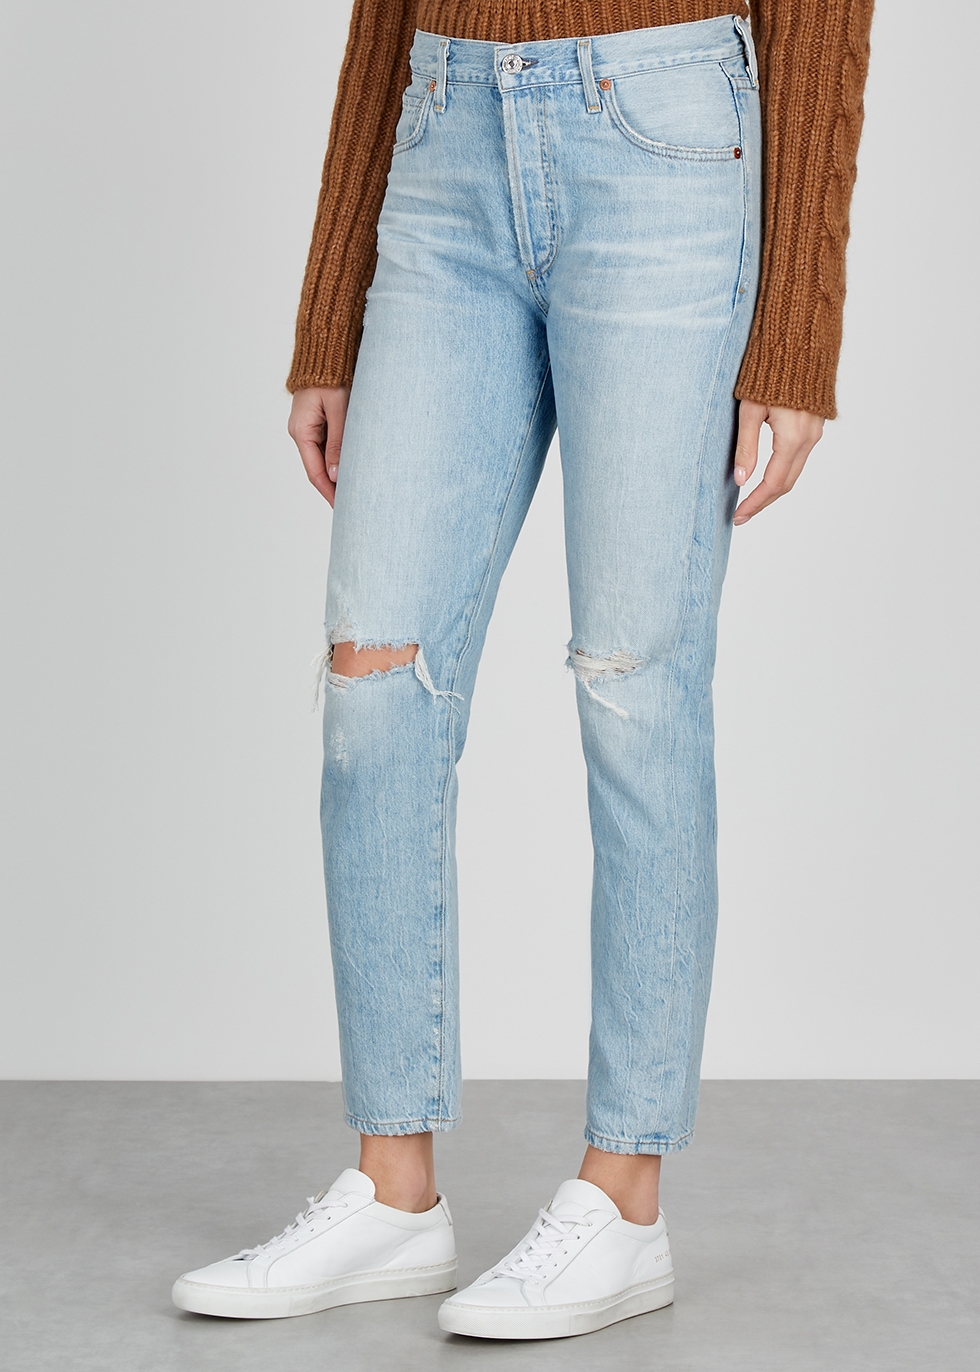 citizens of humanity distressed jeans